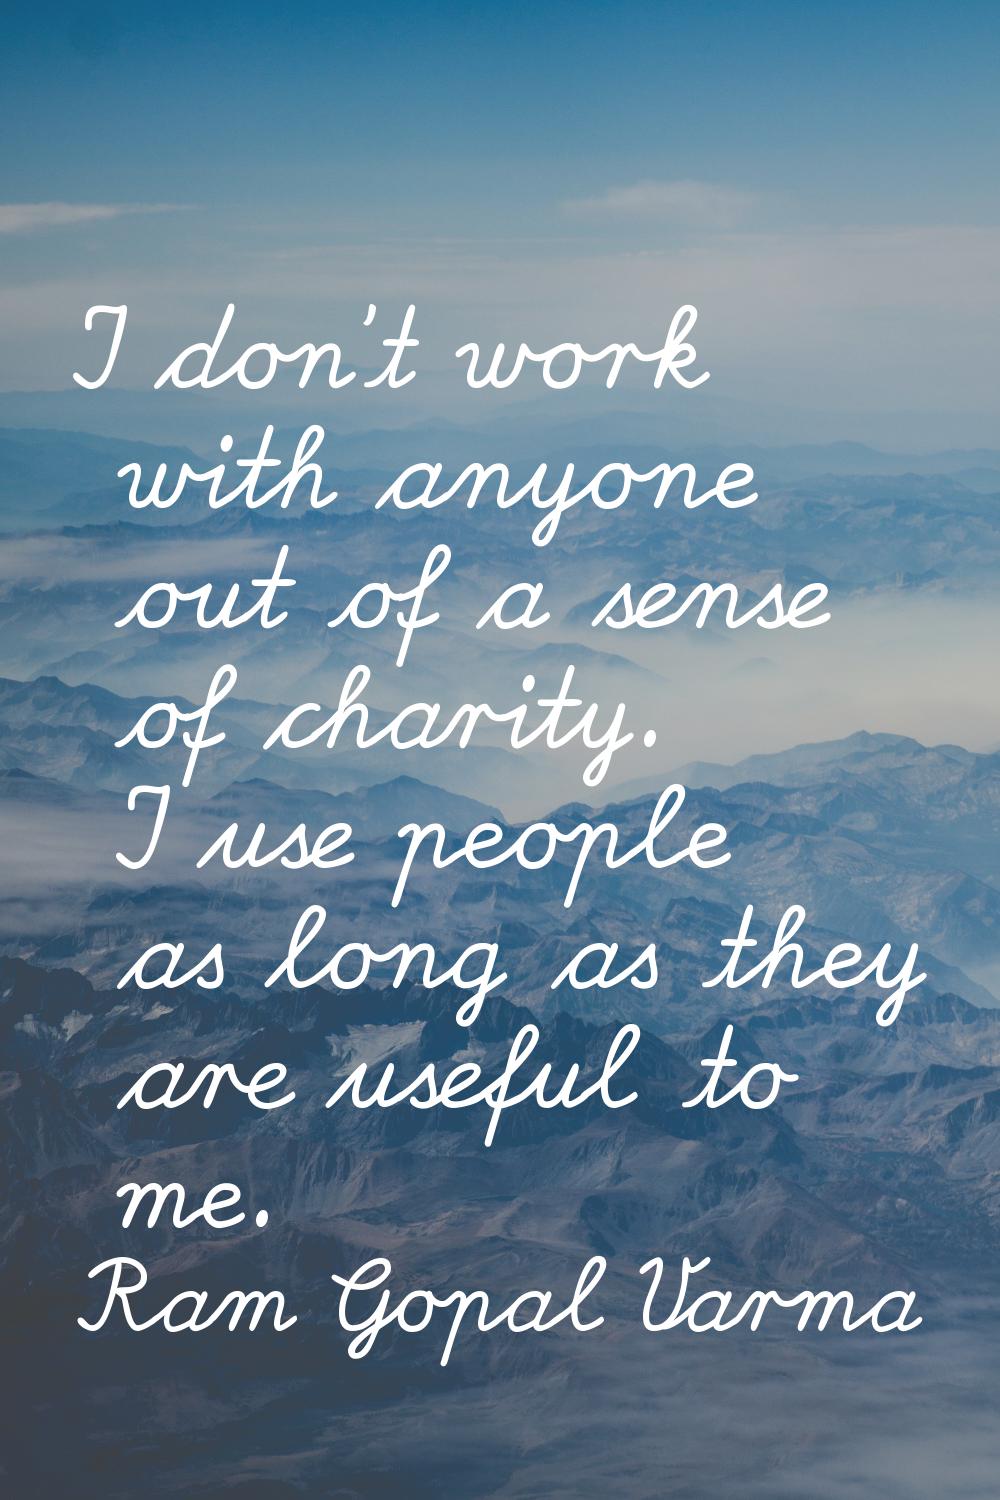 I don't work with anyone out of a sense of charity. I use people as long as they are useful to me.